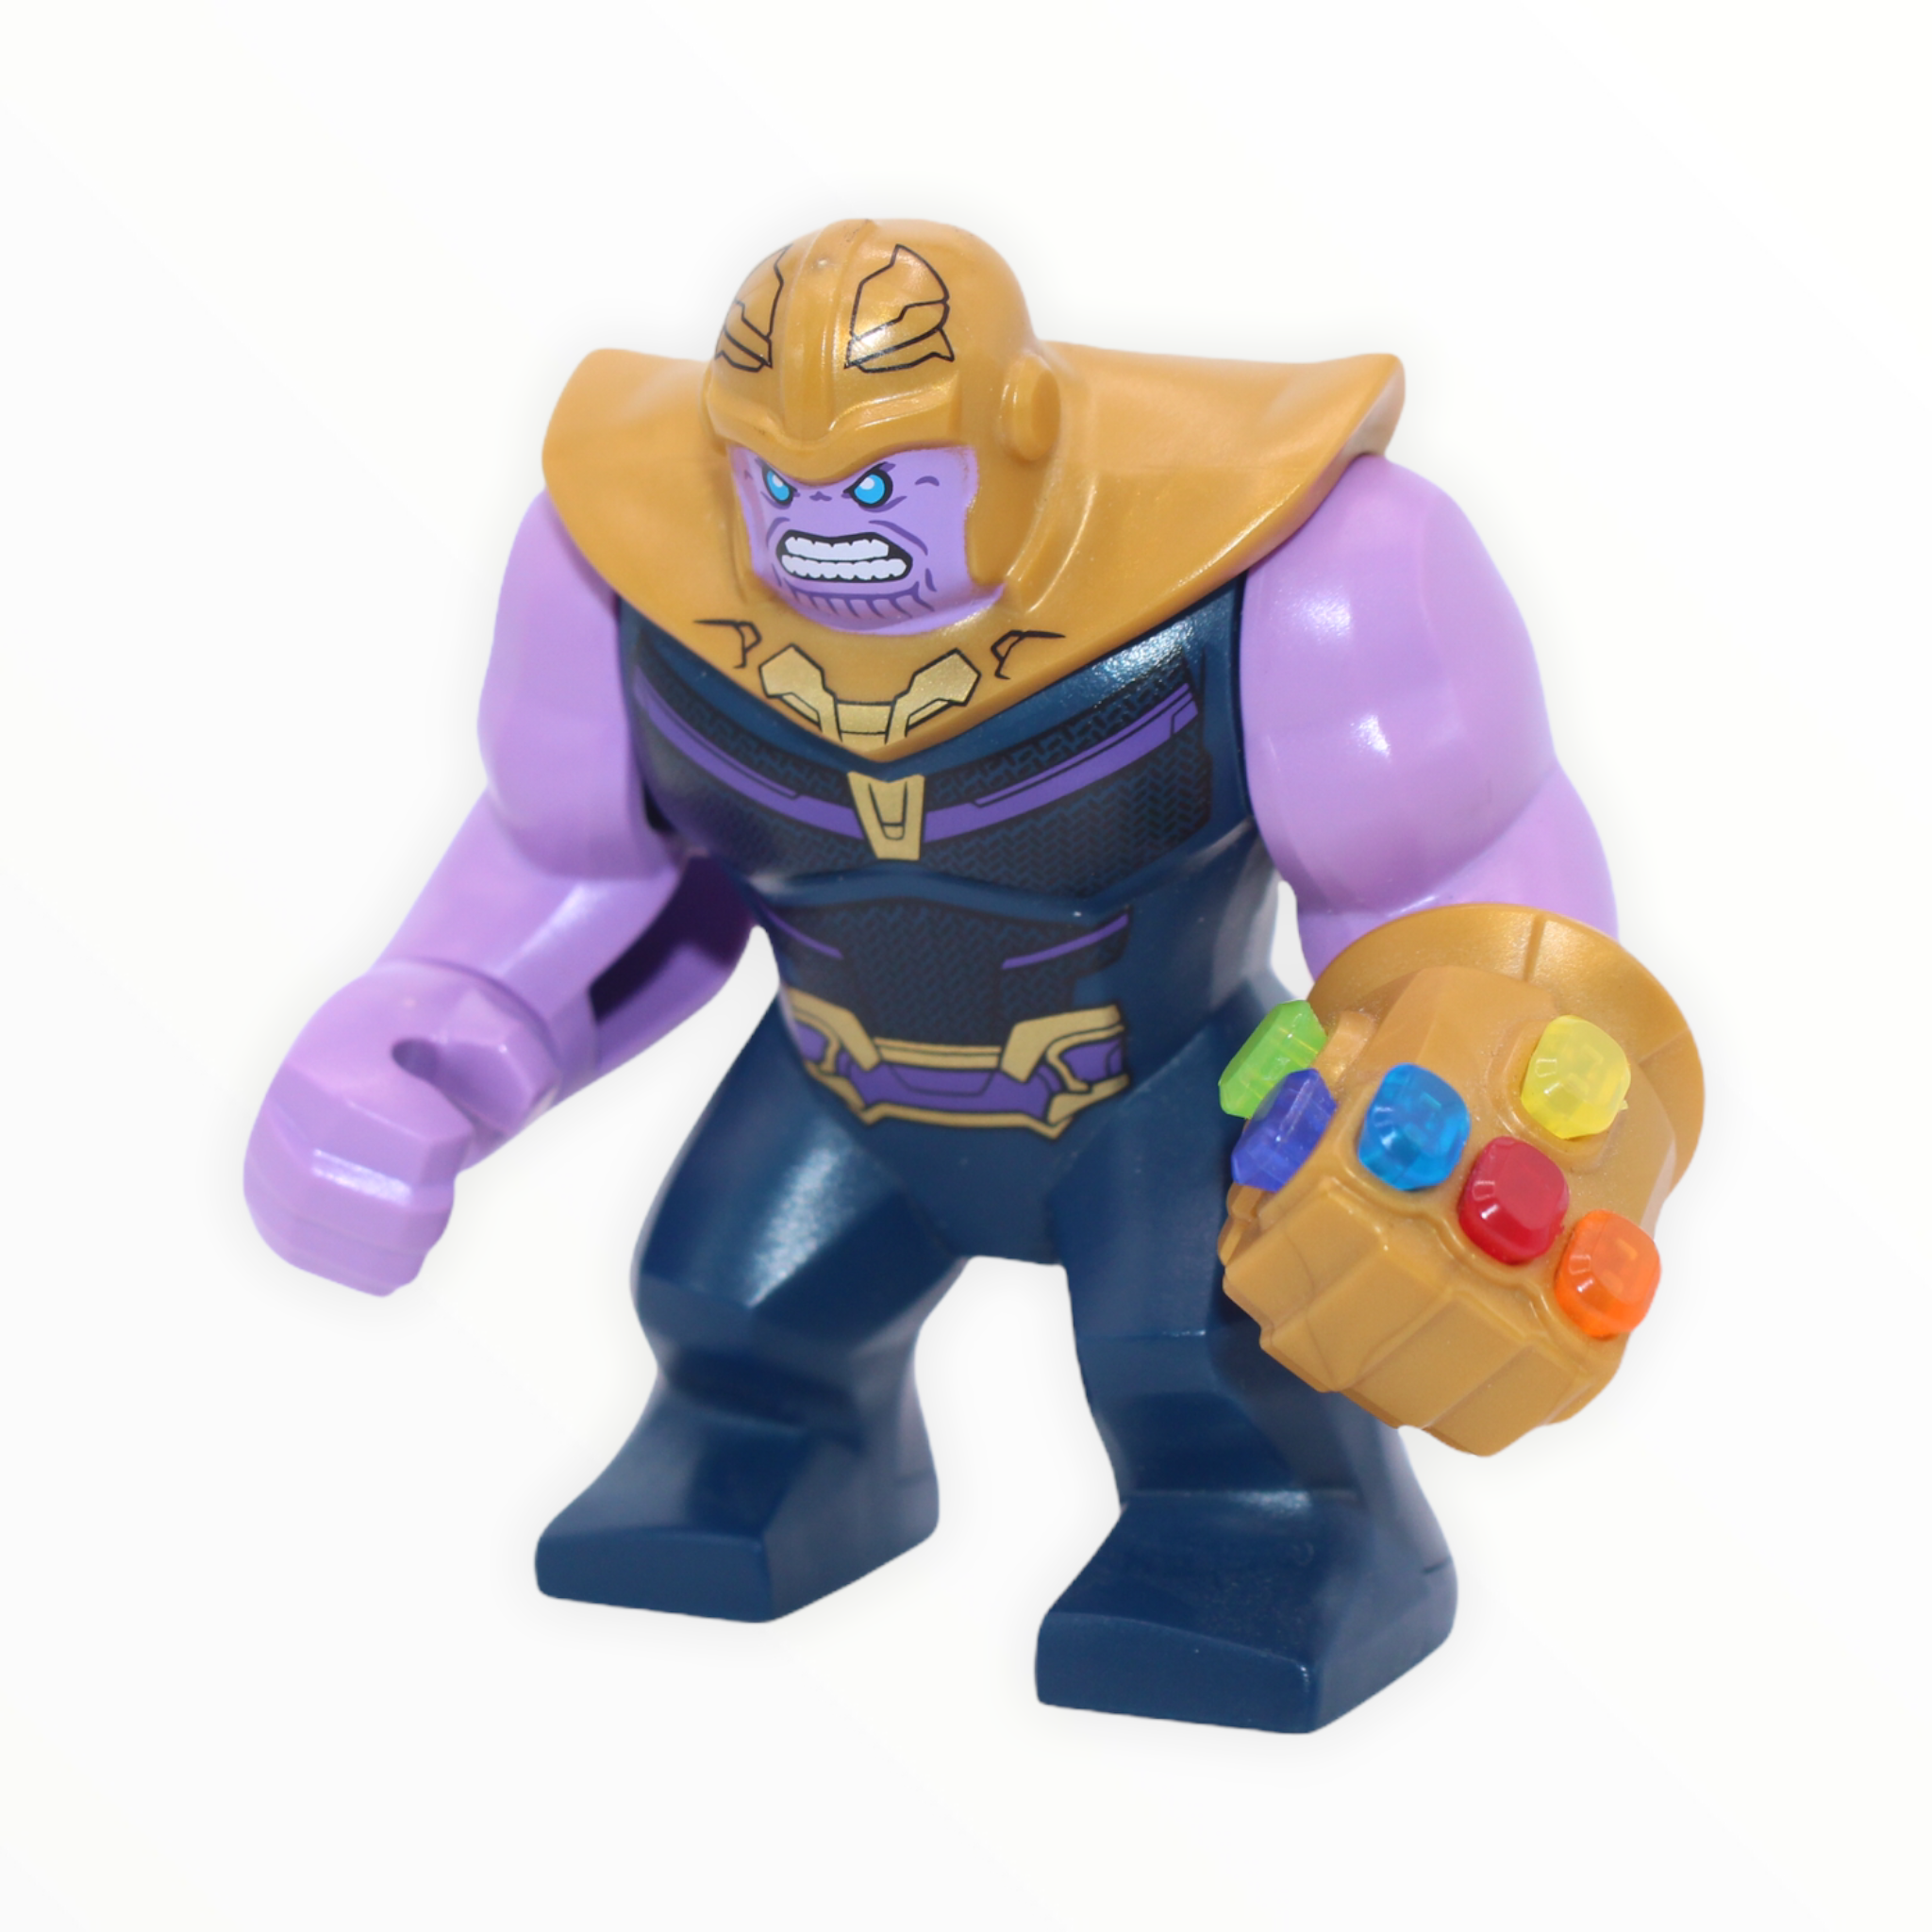 Thanos with Infinity Gauntlet (blue armor)